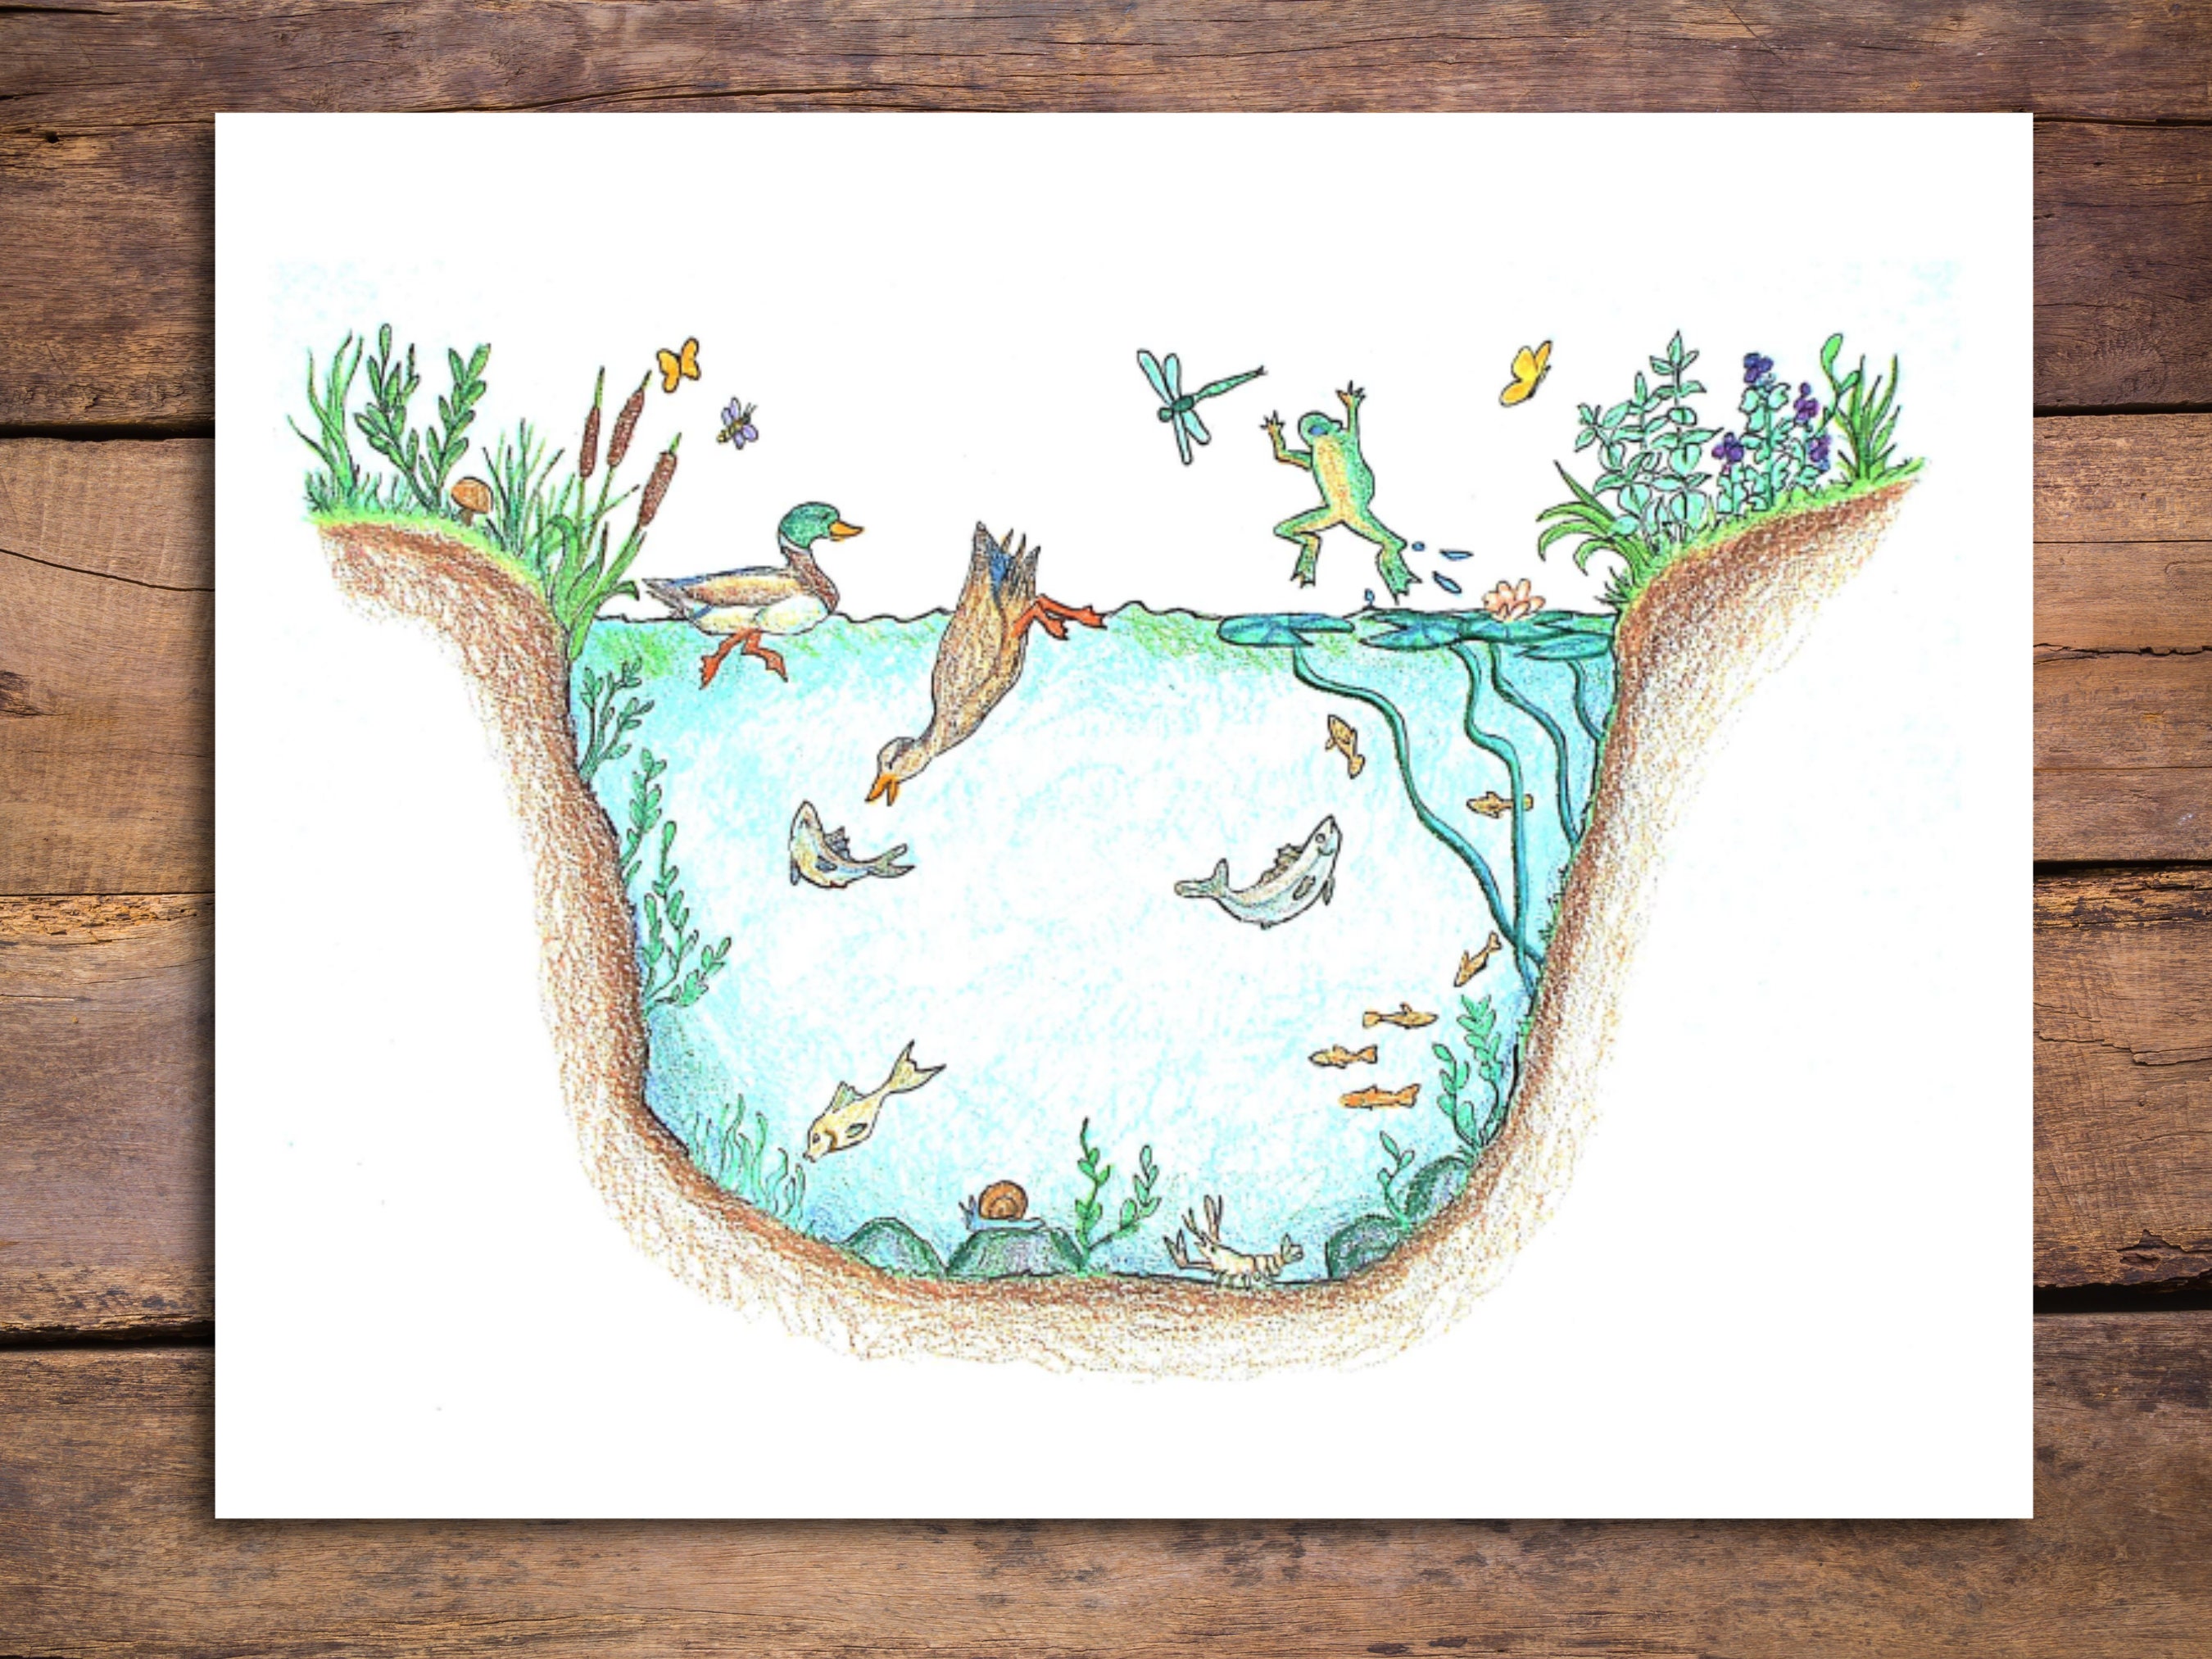 Nature Illustration Blank Note Card Stationary - The Art of Ecology